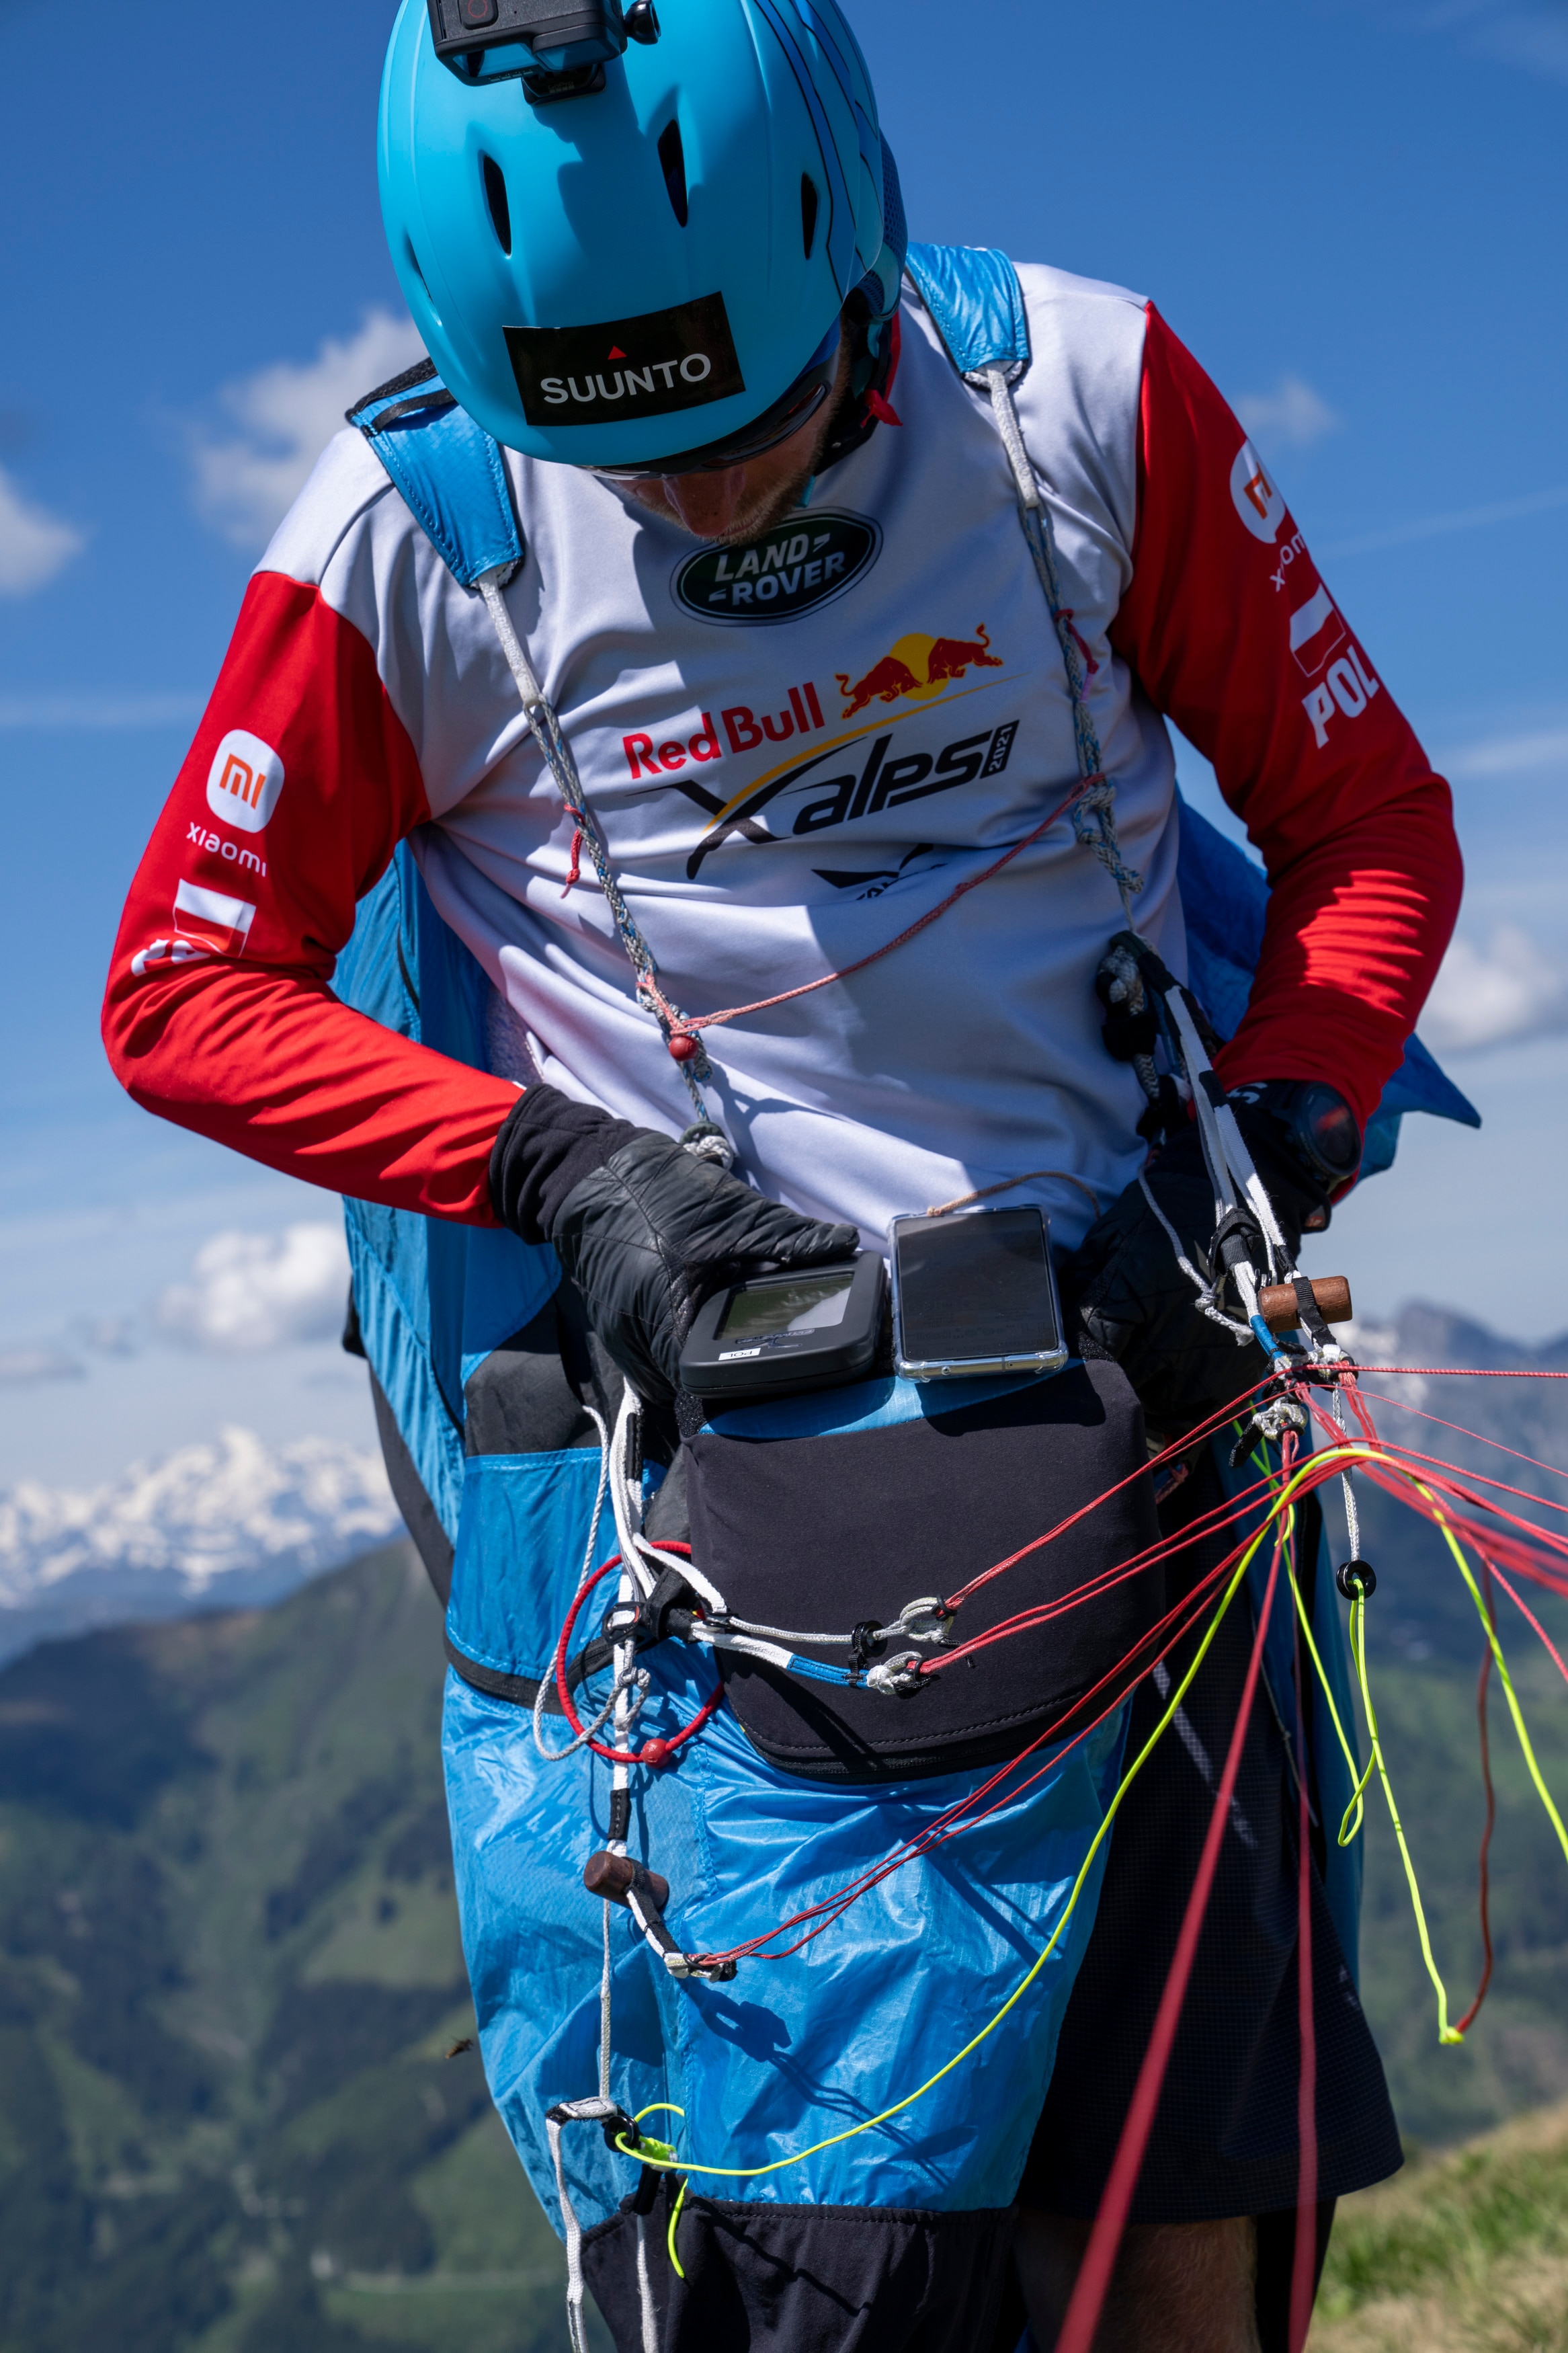 POL performs during the Red Bull X-Alps pre-shooting in Kleinarl, Austria on June 16, 2021.